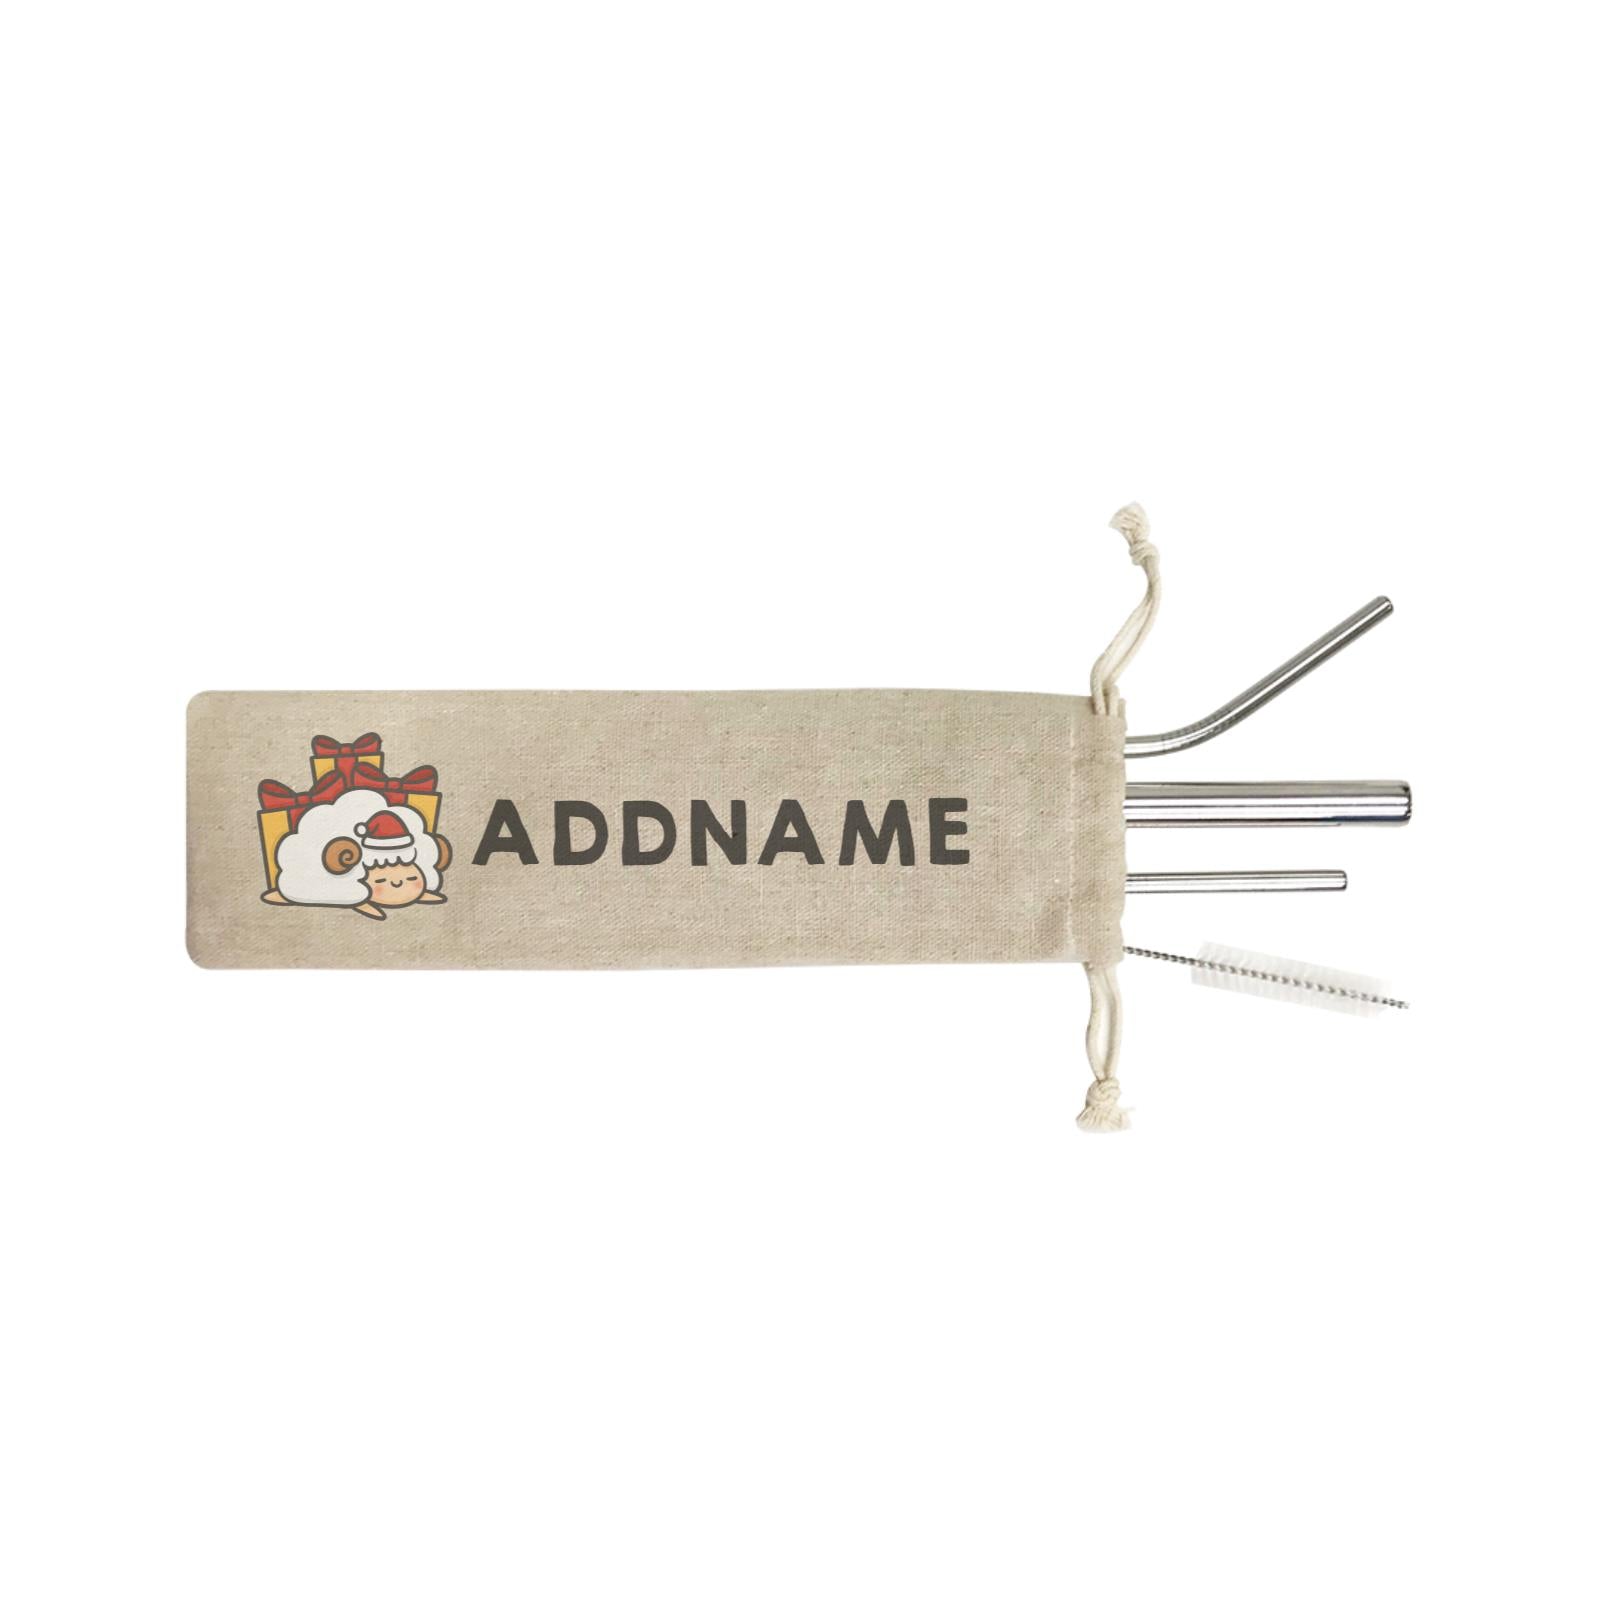 Xmas Cute Sleeping Sheep Addname SB 4-in-1 Stainless Steel Straw Set In a Satchel